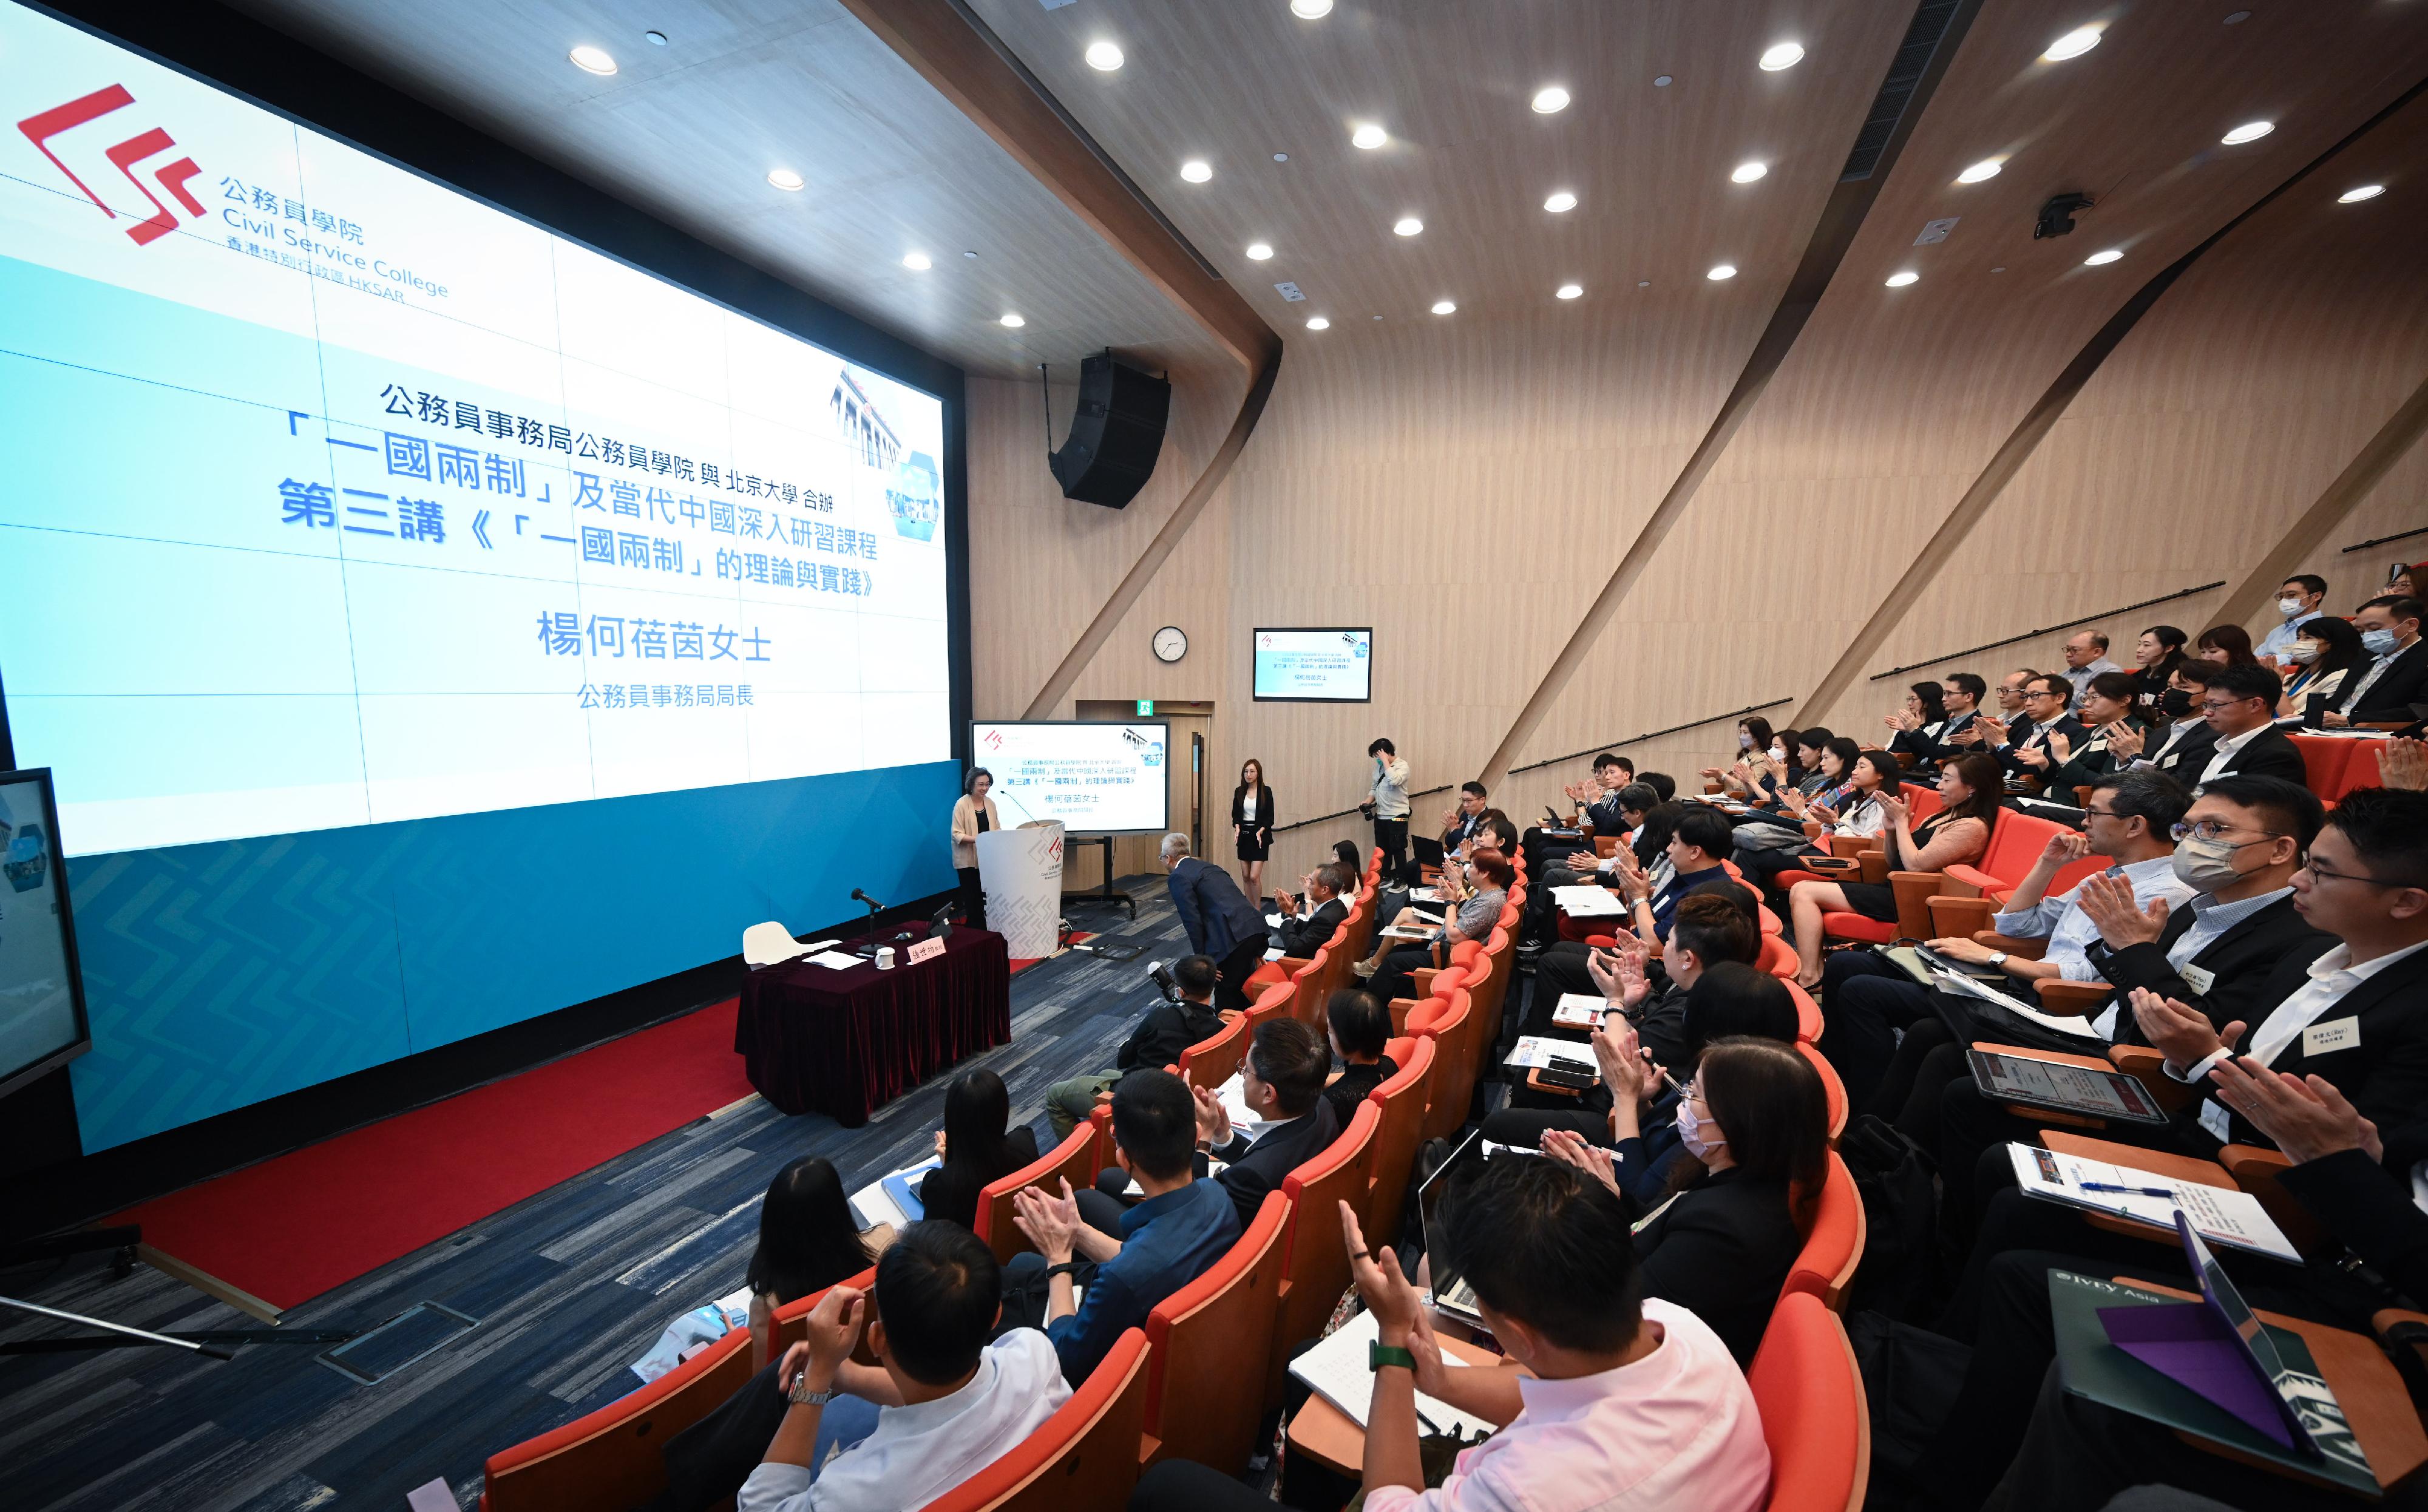 The Civil Service College of the Civil Service Bureau, in collaboration with the Institute for Hong Kong and Macau Studies, Peking University, launched an in-depth programme on "one country, two systems" and the contemporary China, and organised a lecture on the topic of "The Theory and Practice of 'One Country, Two Systems'". Photo shows the Secretary for the Civil Service, Mrs Ingrid Yeung, delivering a speech at the talk.